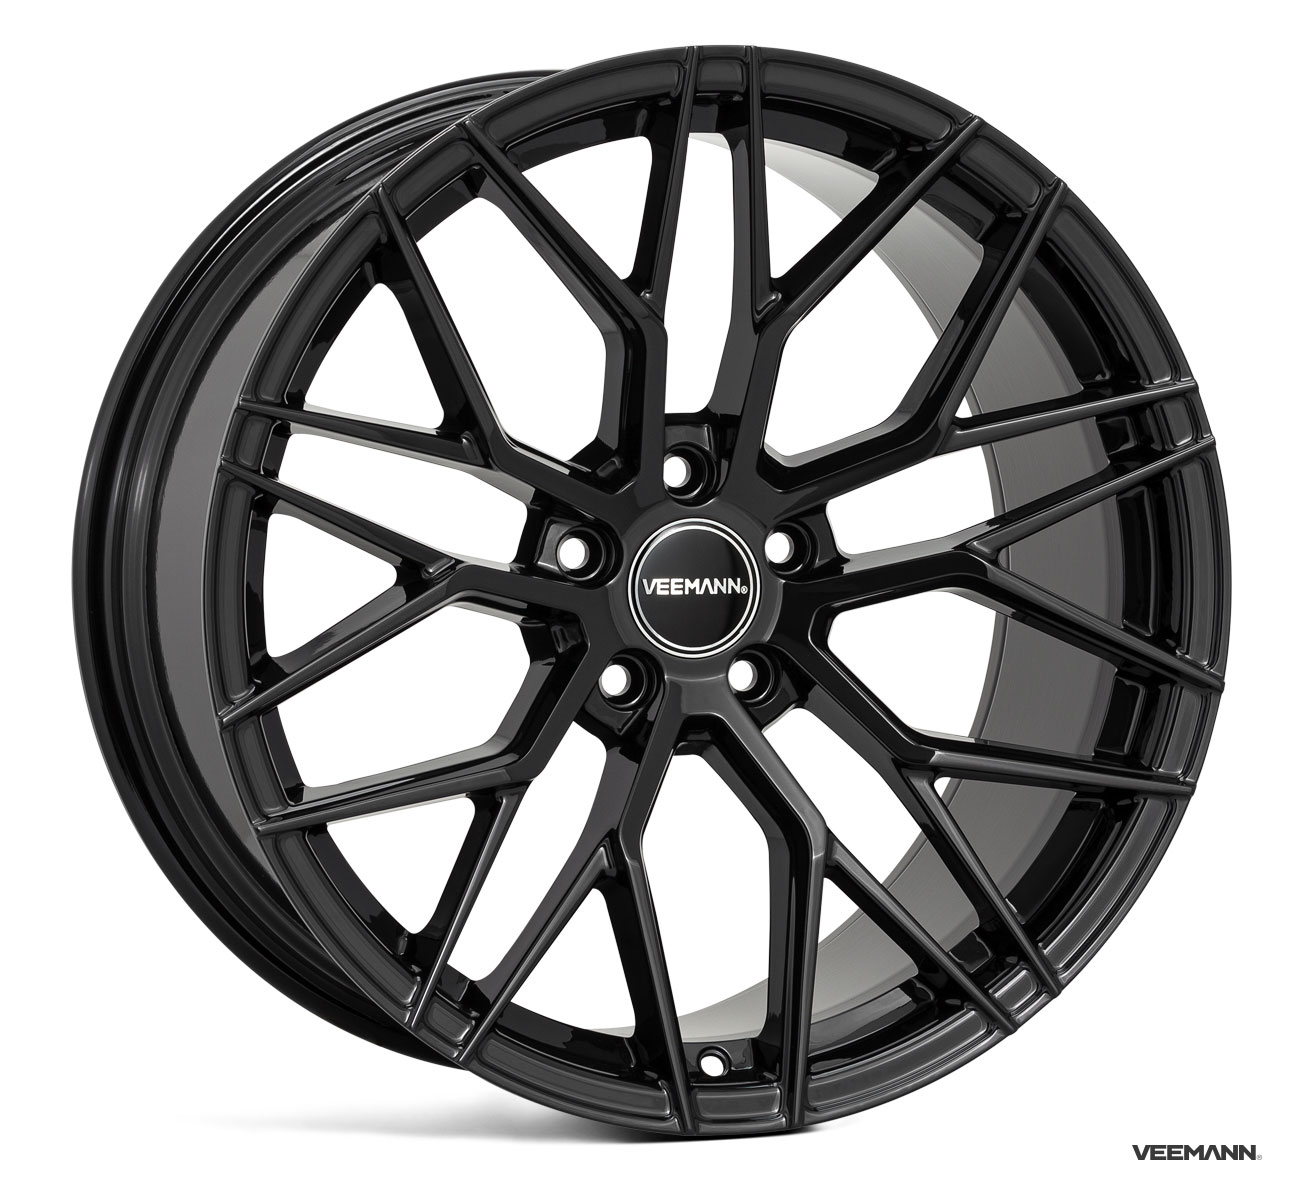 NEW 19" VEEMANN VC520 ALLOY WHEELS IN GLOSS BLACK WITH WIDER 9.5" REARS 5X112